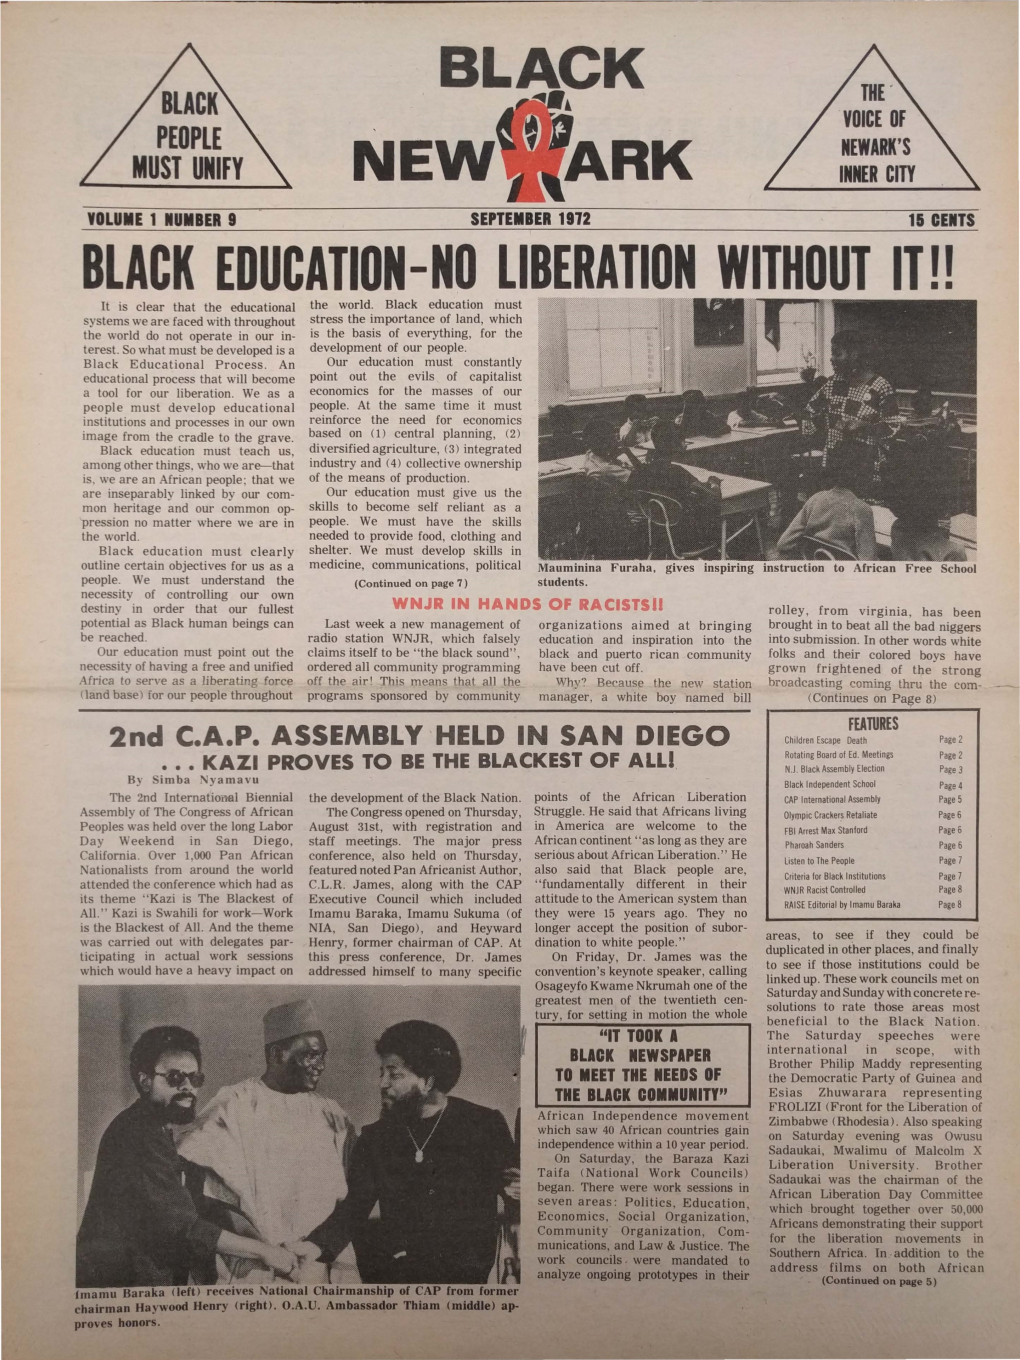 Black Education-No Liberation Without It!!